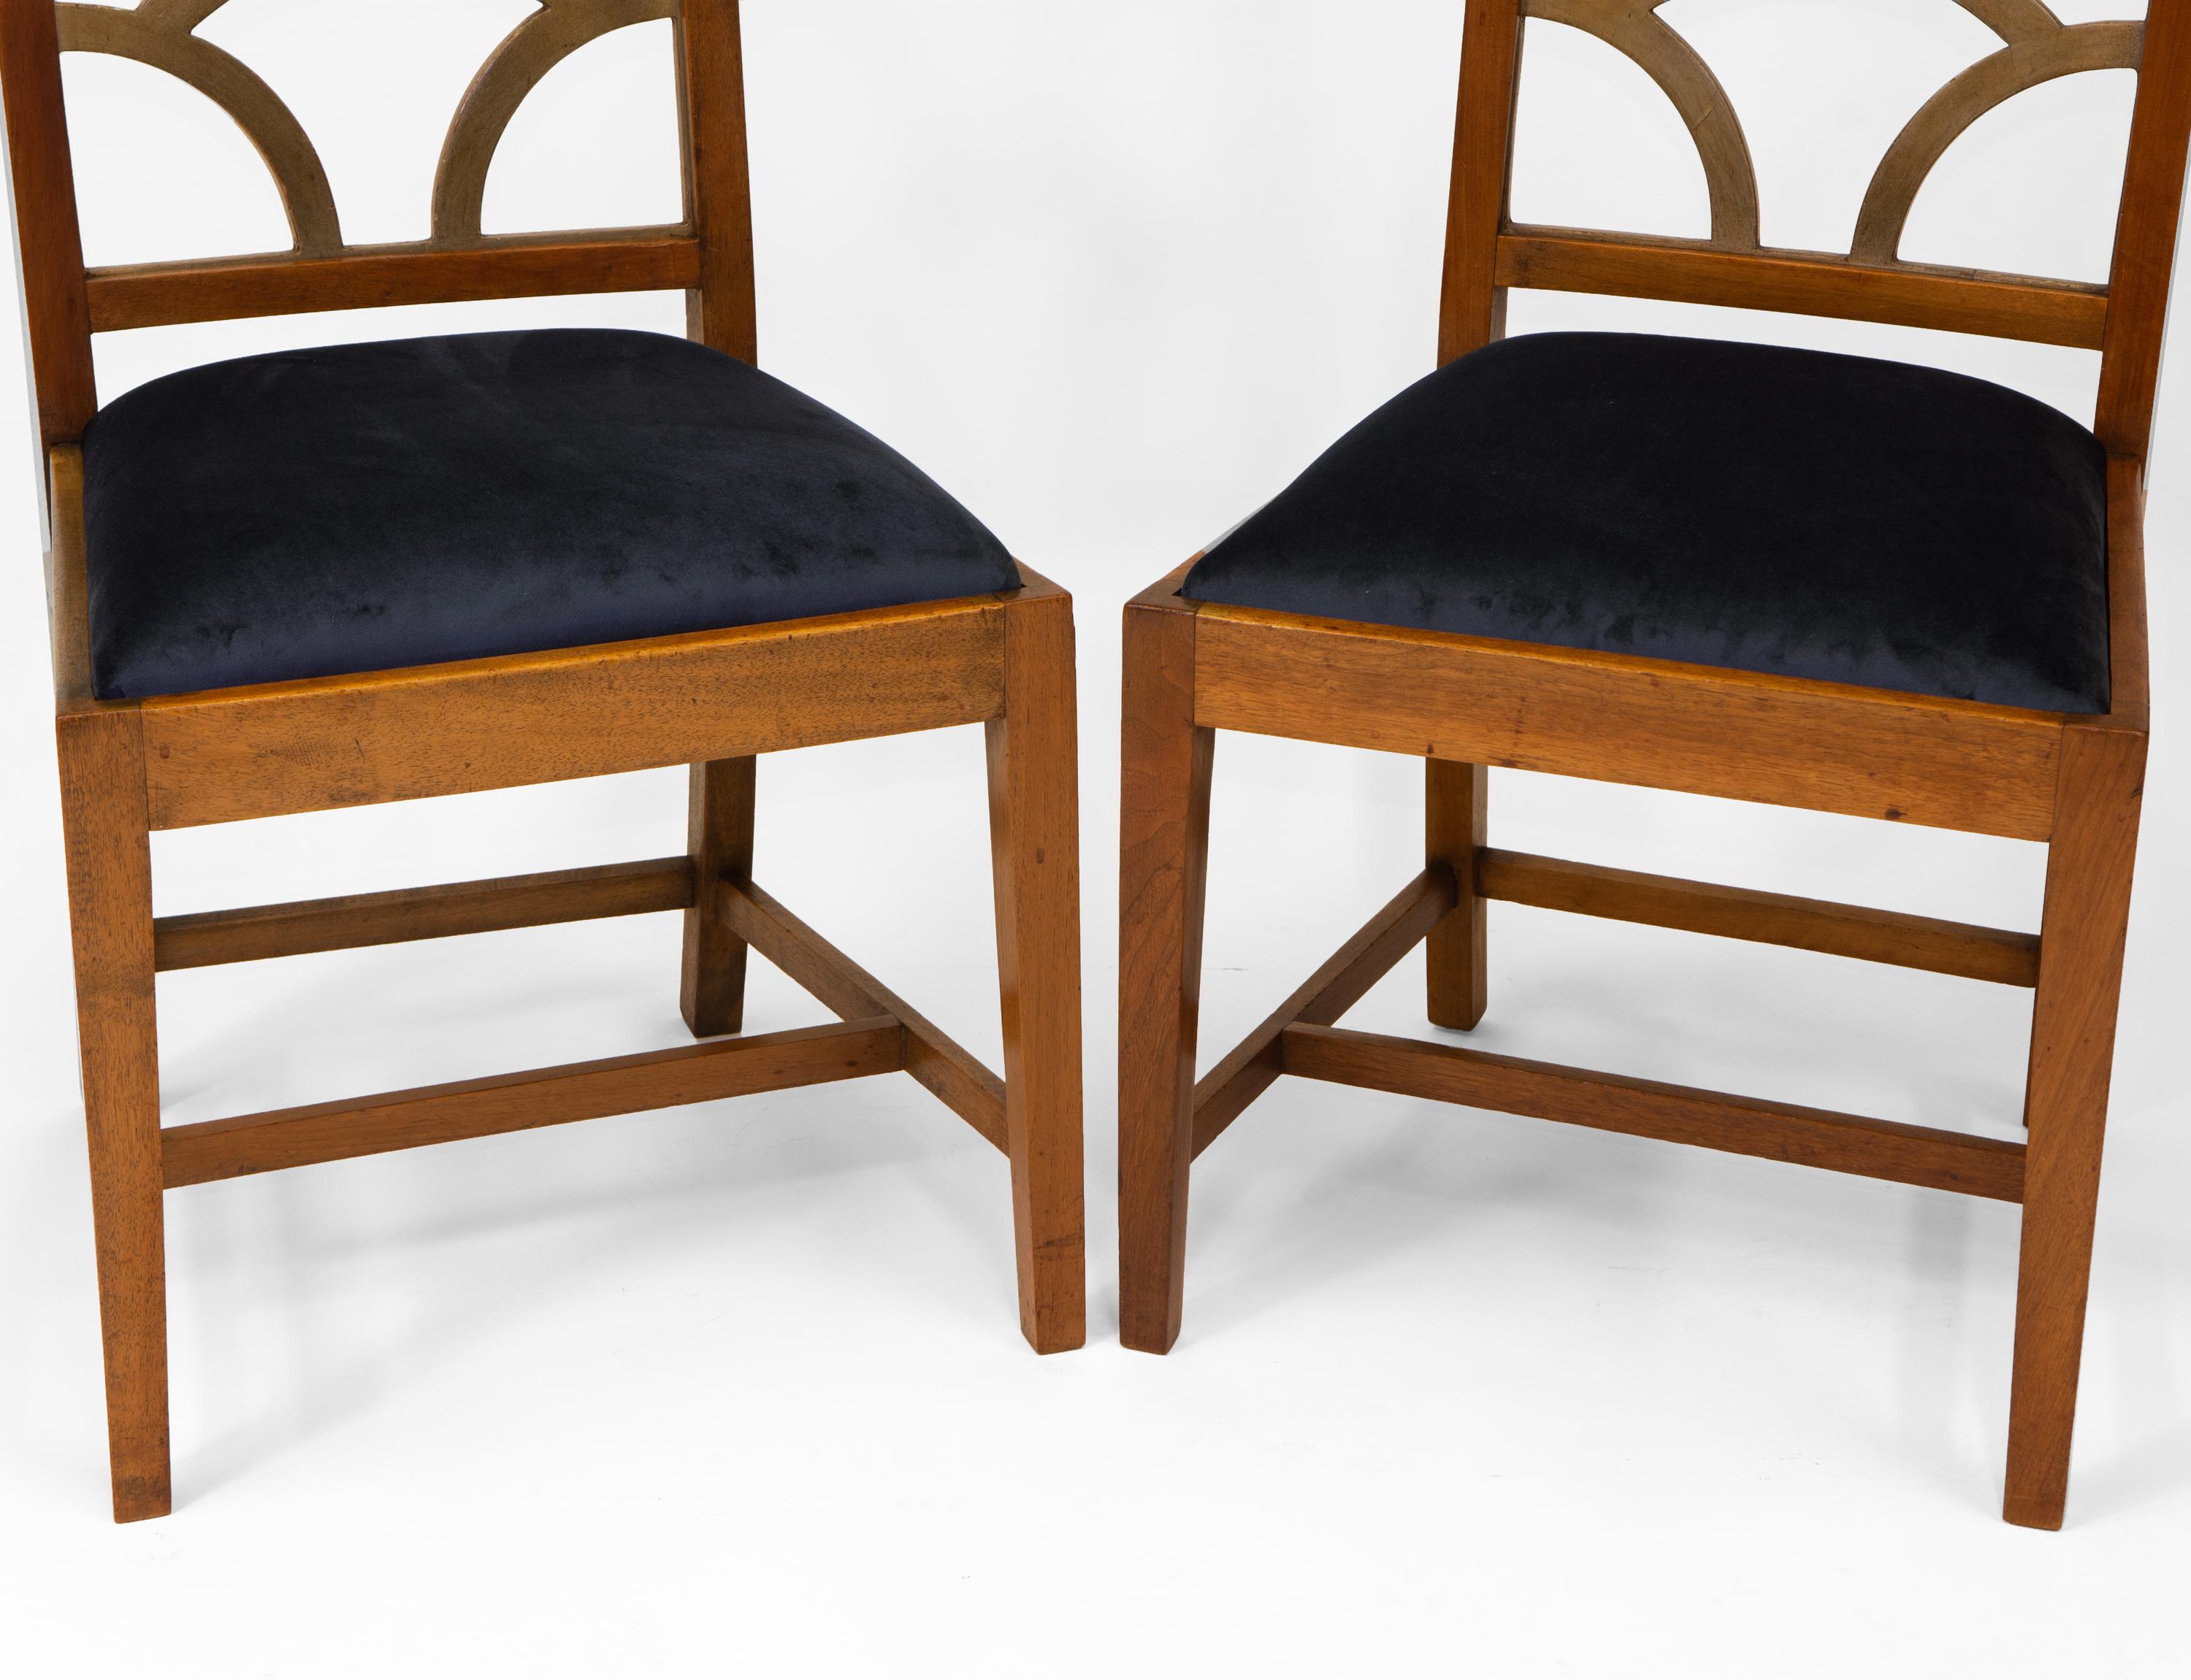 Rowley Gallery Art Deco Pair Of  Walnut Cloud Form Back Side Chairs 1930's For Sale 1